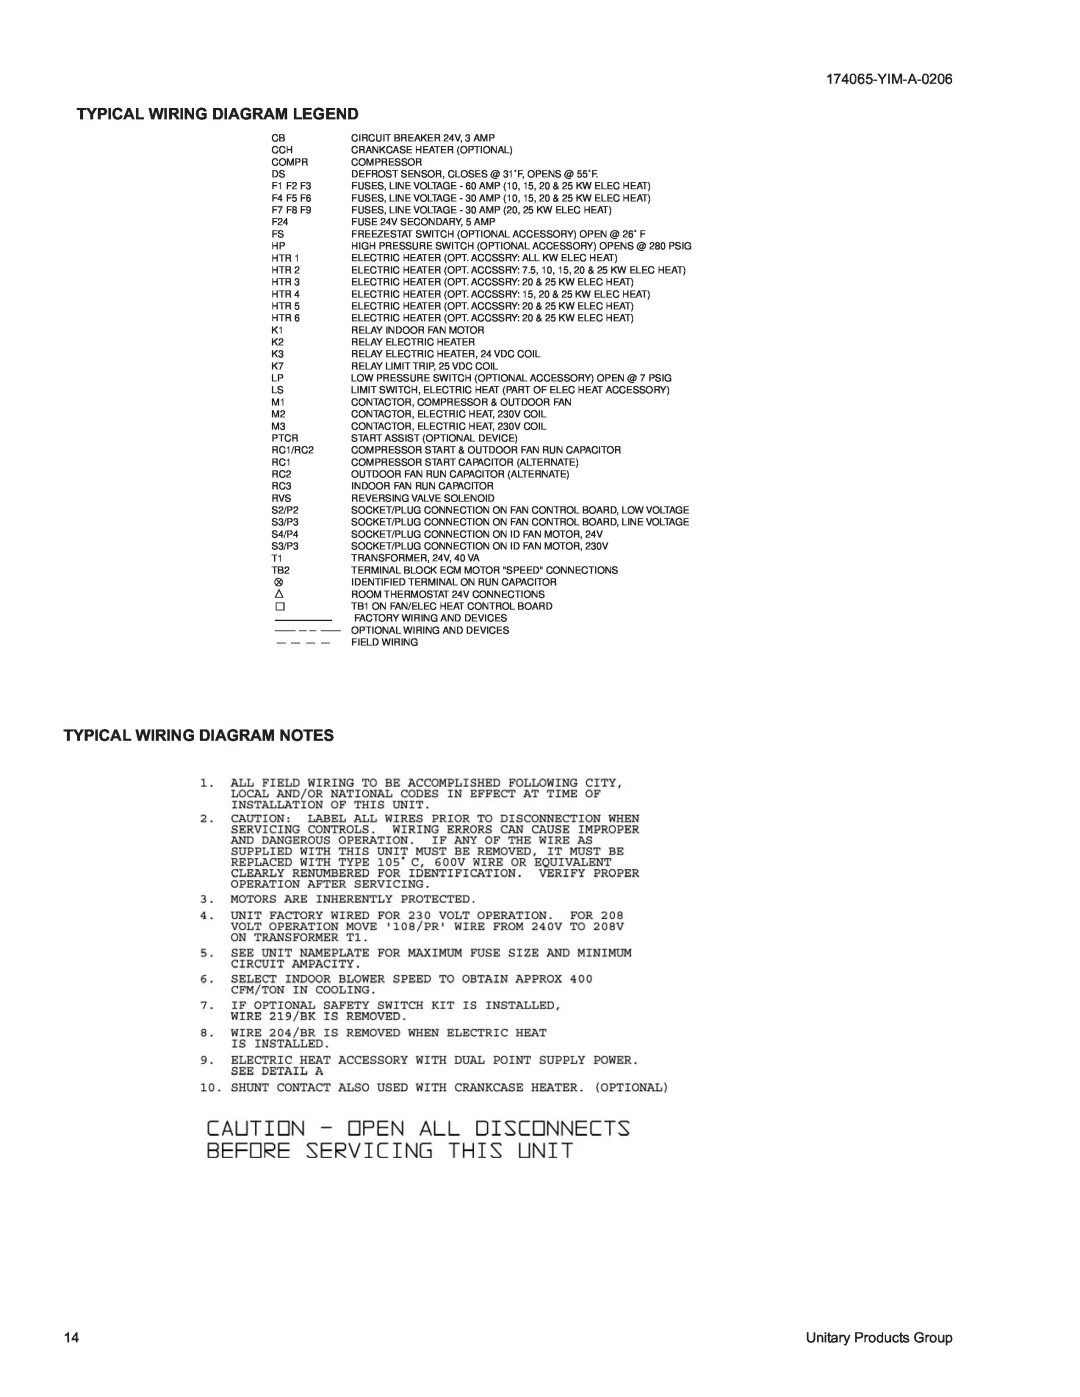 York D2EB Typical Wiring Diagram Legend, Typical Wiring Diagram Notes, YIM-A-0206, Unitary Products Group 